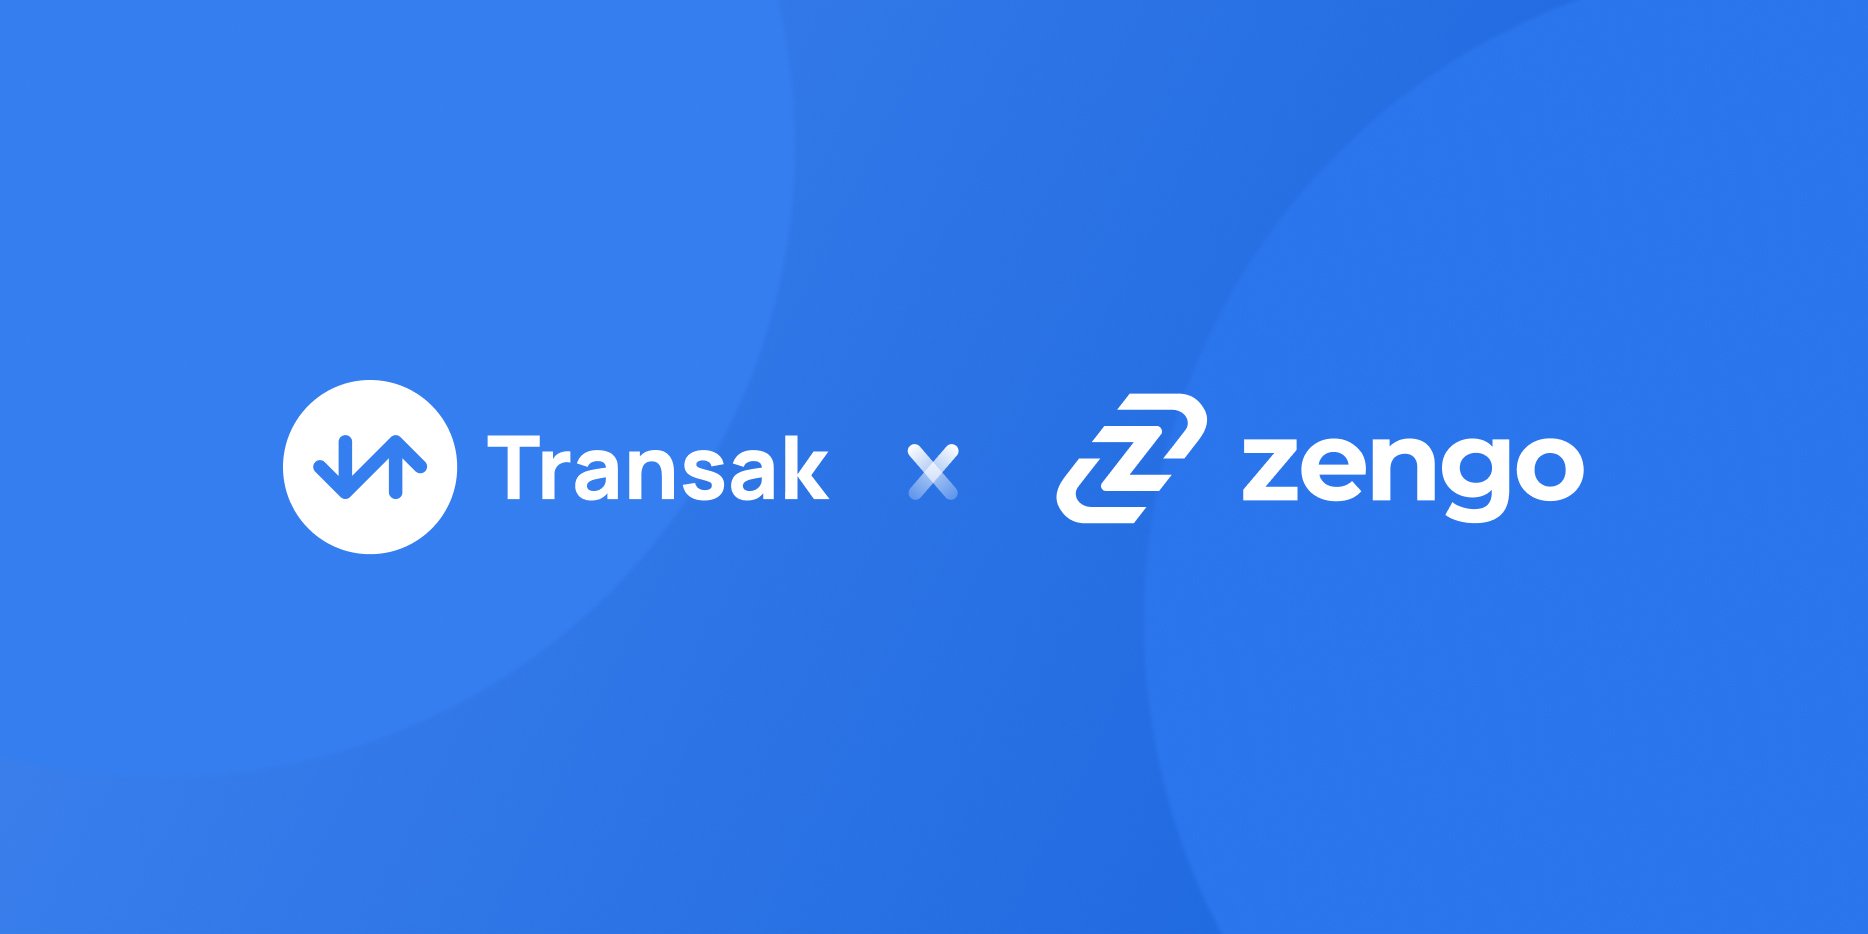 Zengo wallet users can now buy and self-custody crypto under 30 seconds with no seed phrase vulnerability. Learn more about this partnership here.